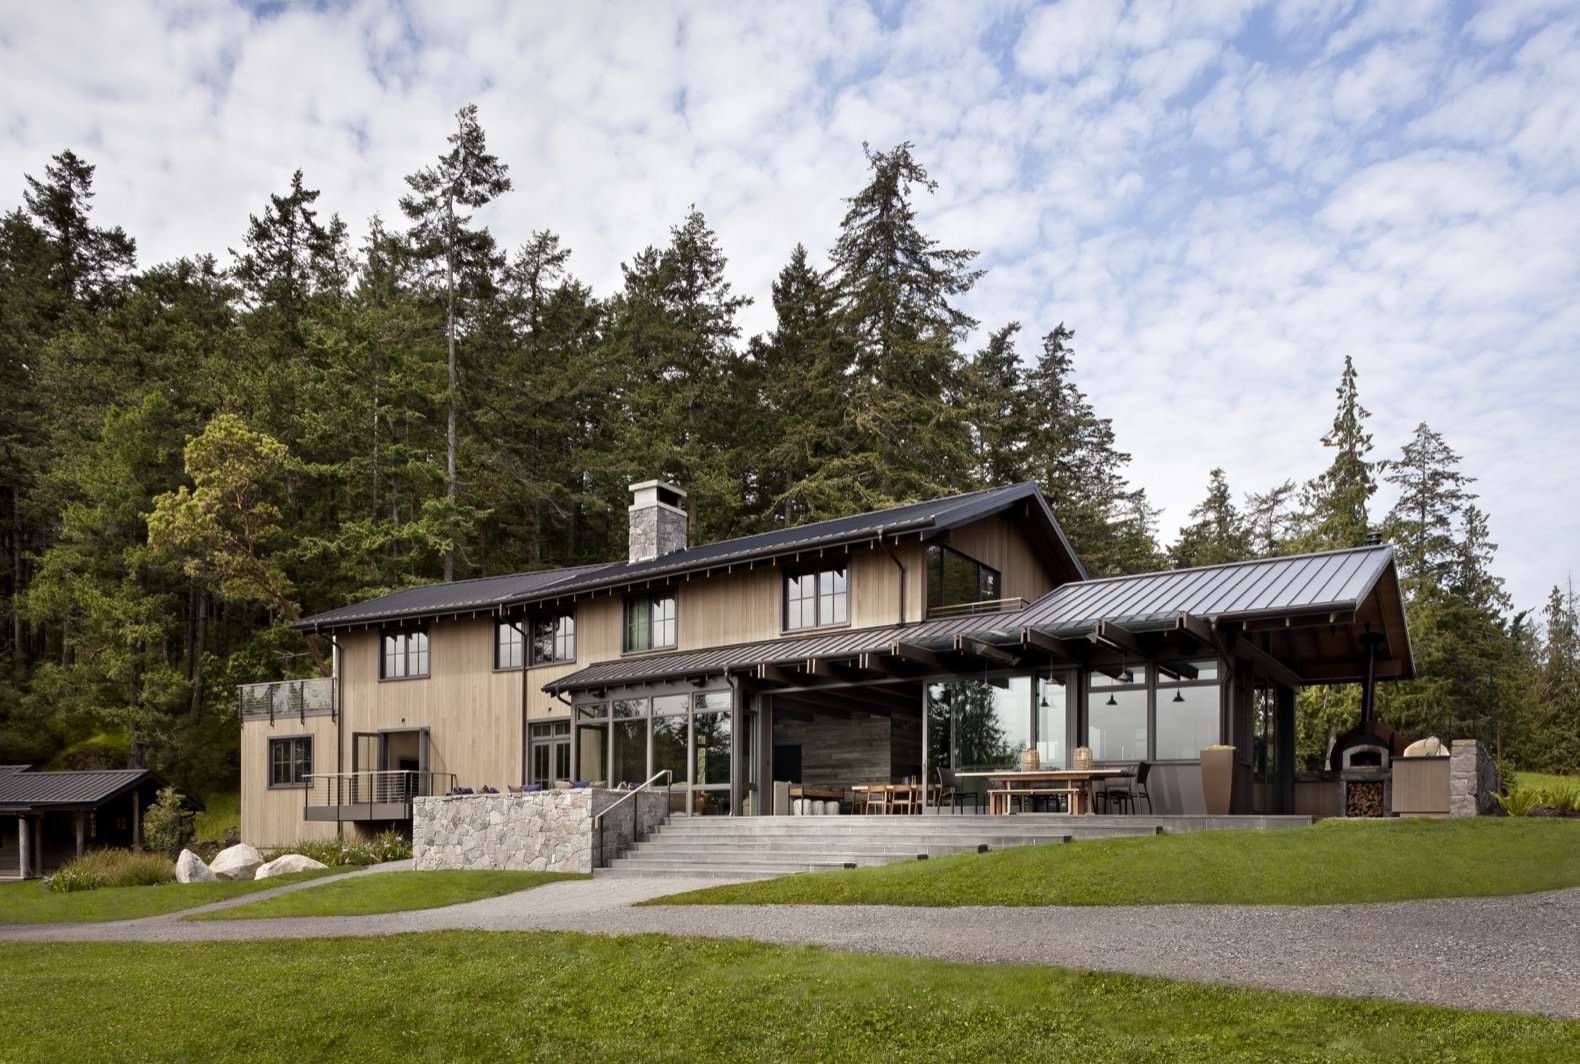 Located on Orcas Island, the largest of the San Juan Islands in Washington, the year-round retreat includes a new main house and six renovated cabins loosely arranged around a semi-circular lawn facing the beach.